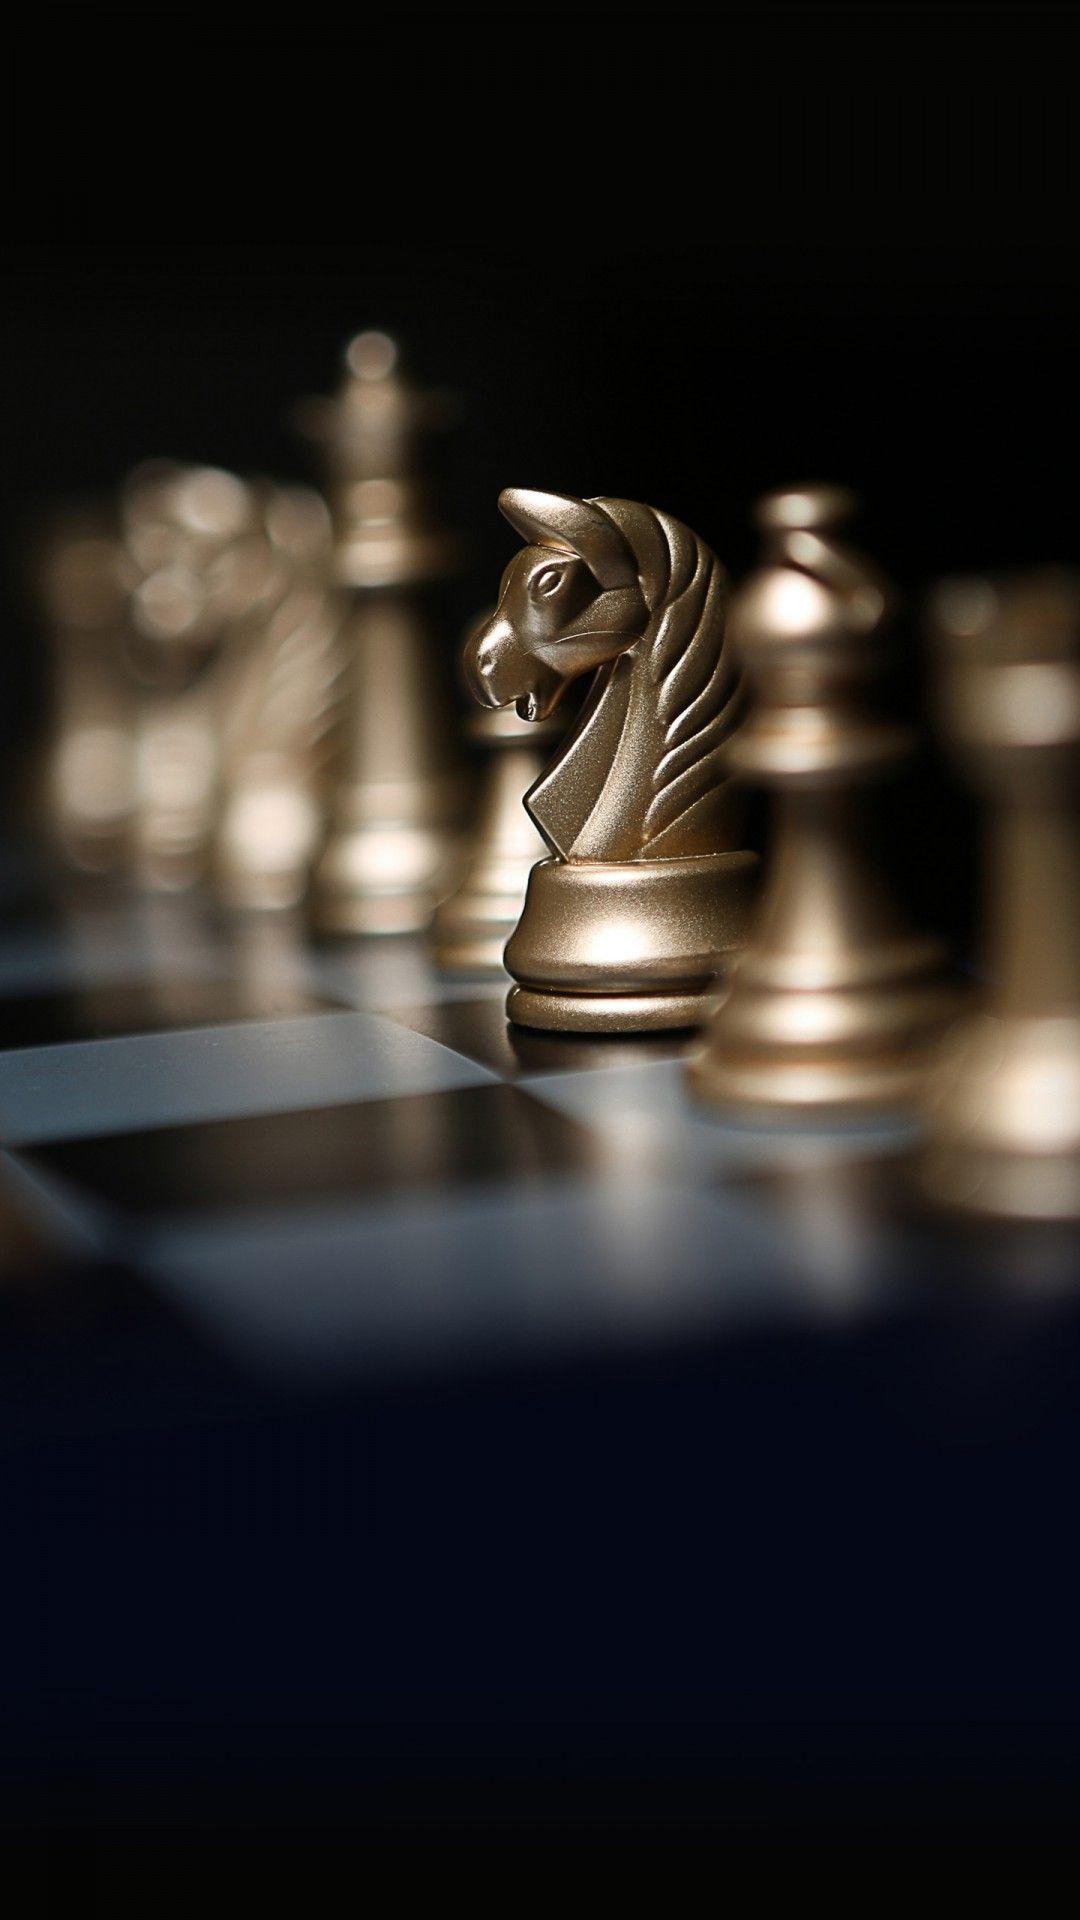 Wallpaper ID 447442  Game Chess Phone Wallpaper 3D Chess Board  720x1280 free download